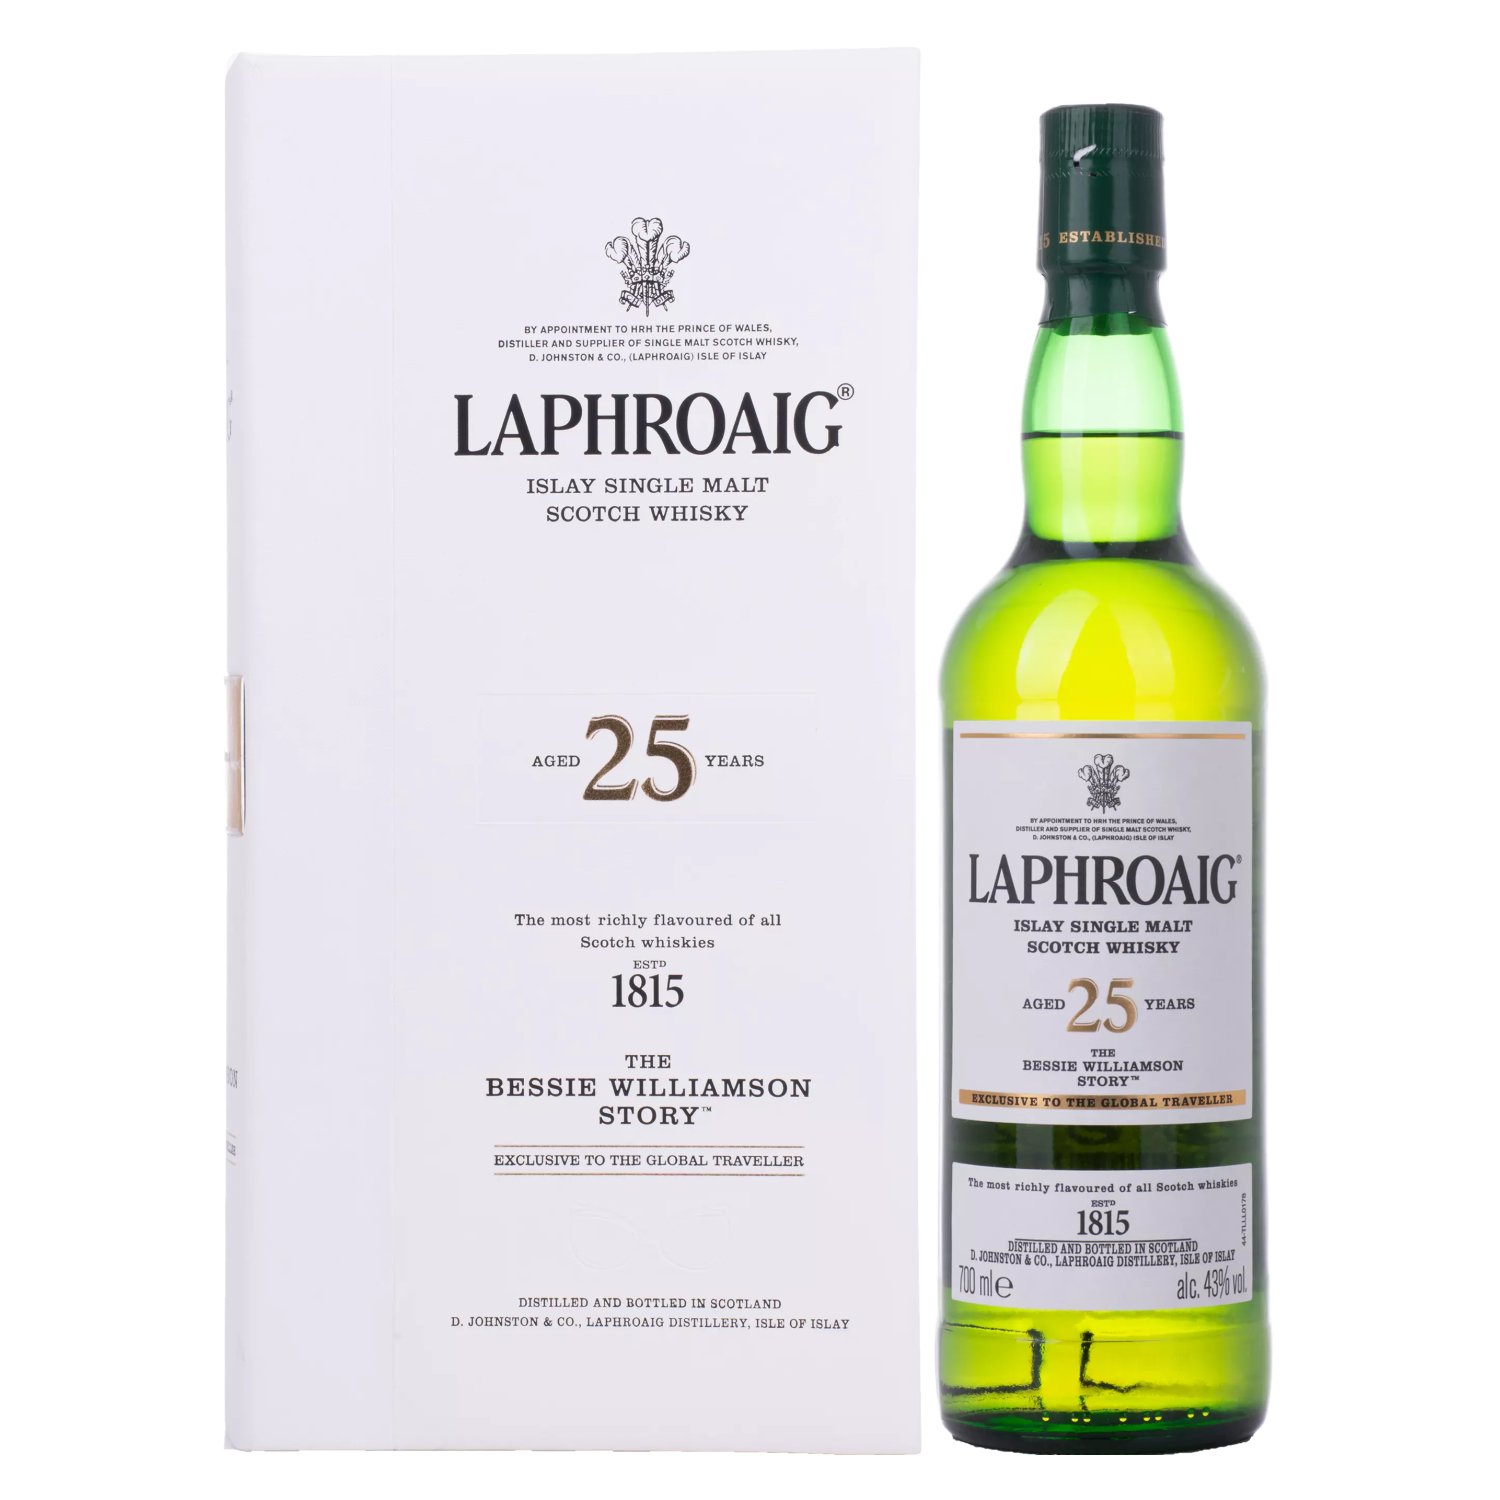 Laphroaig 25 Years Old THE BESSIE WILLIAMSON STORY Edition 2019 43% Vol. 0,7l in